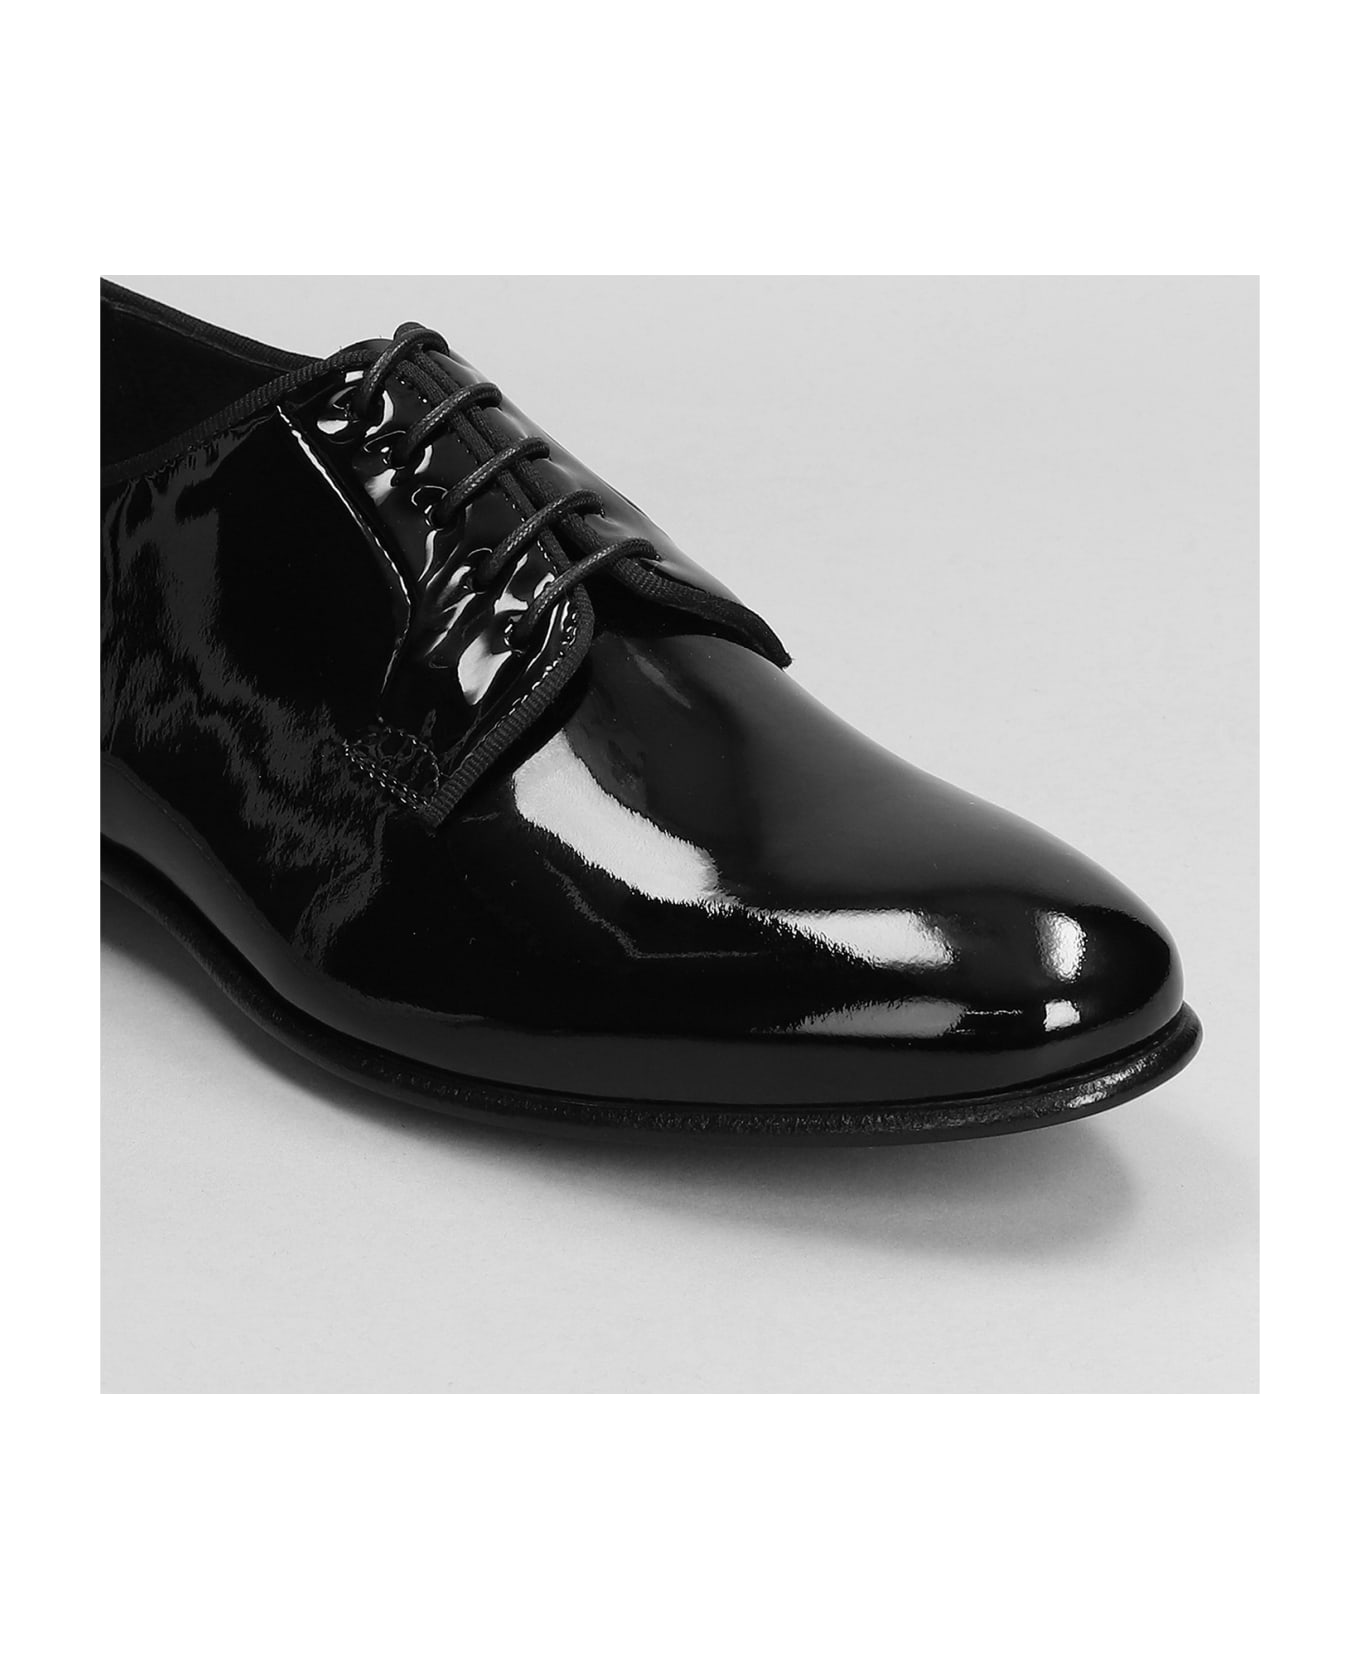 Green George Lace Up Shoes In Black Patent Leather - black